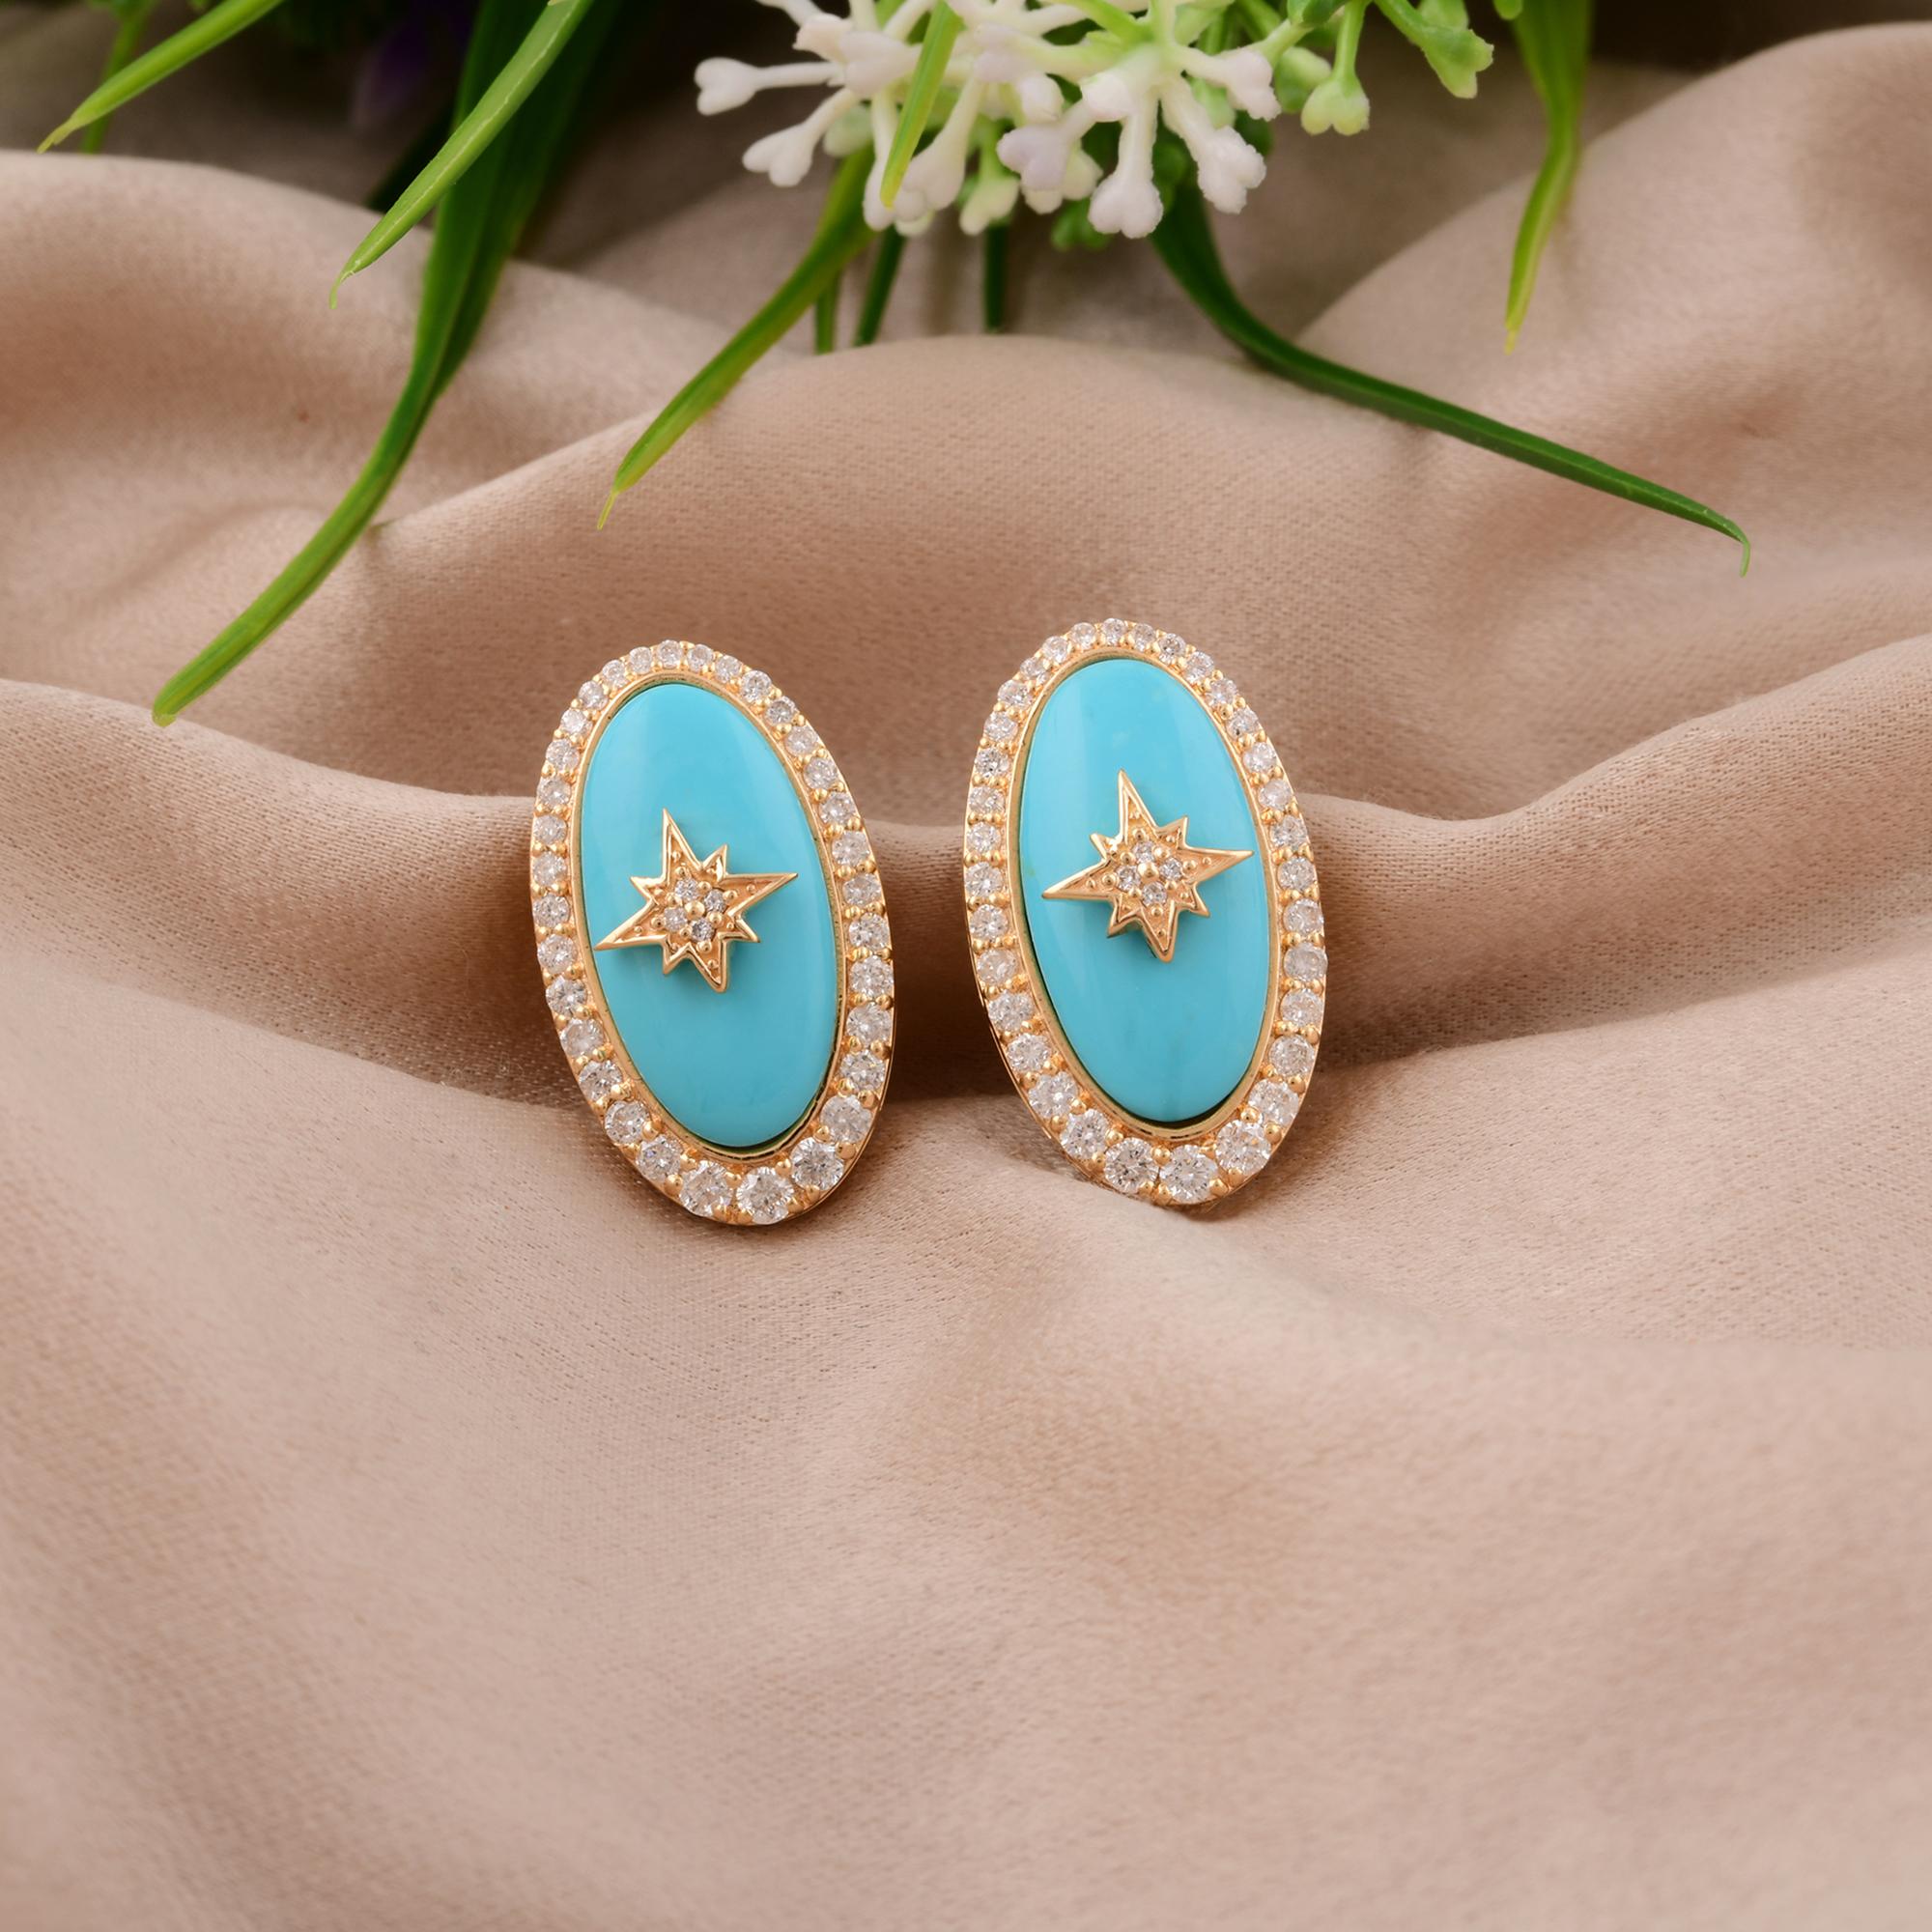 Oval Cut Natural Oval Turquoise Starburst Earrings Diamond 18 Karat Yellow Gold Jewelry For Sale